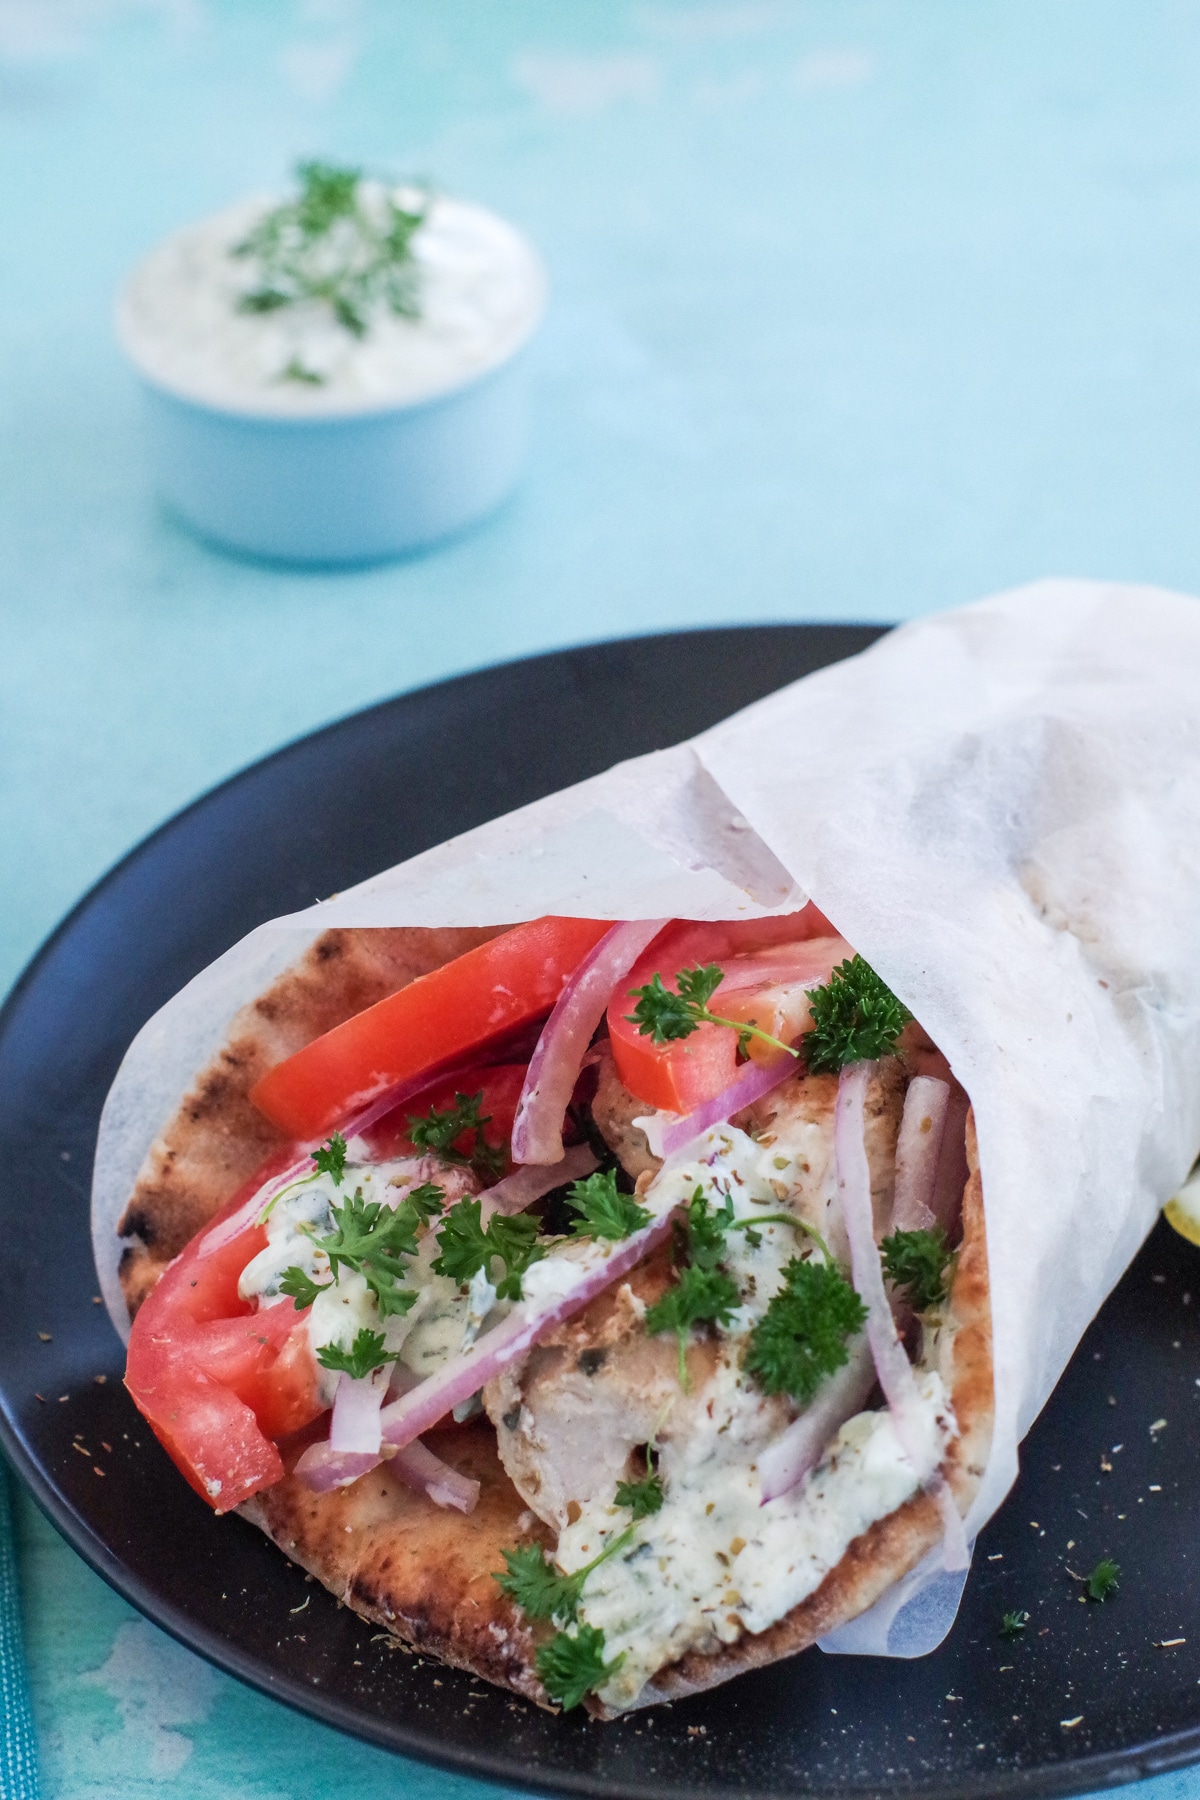 Greek chicken souvlaki wrapped in pita with tomatoes, red onion, tzatziki and parsley, wrapped in paper on black plate